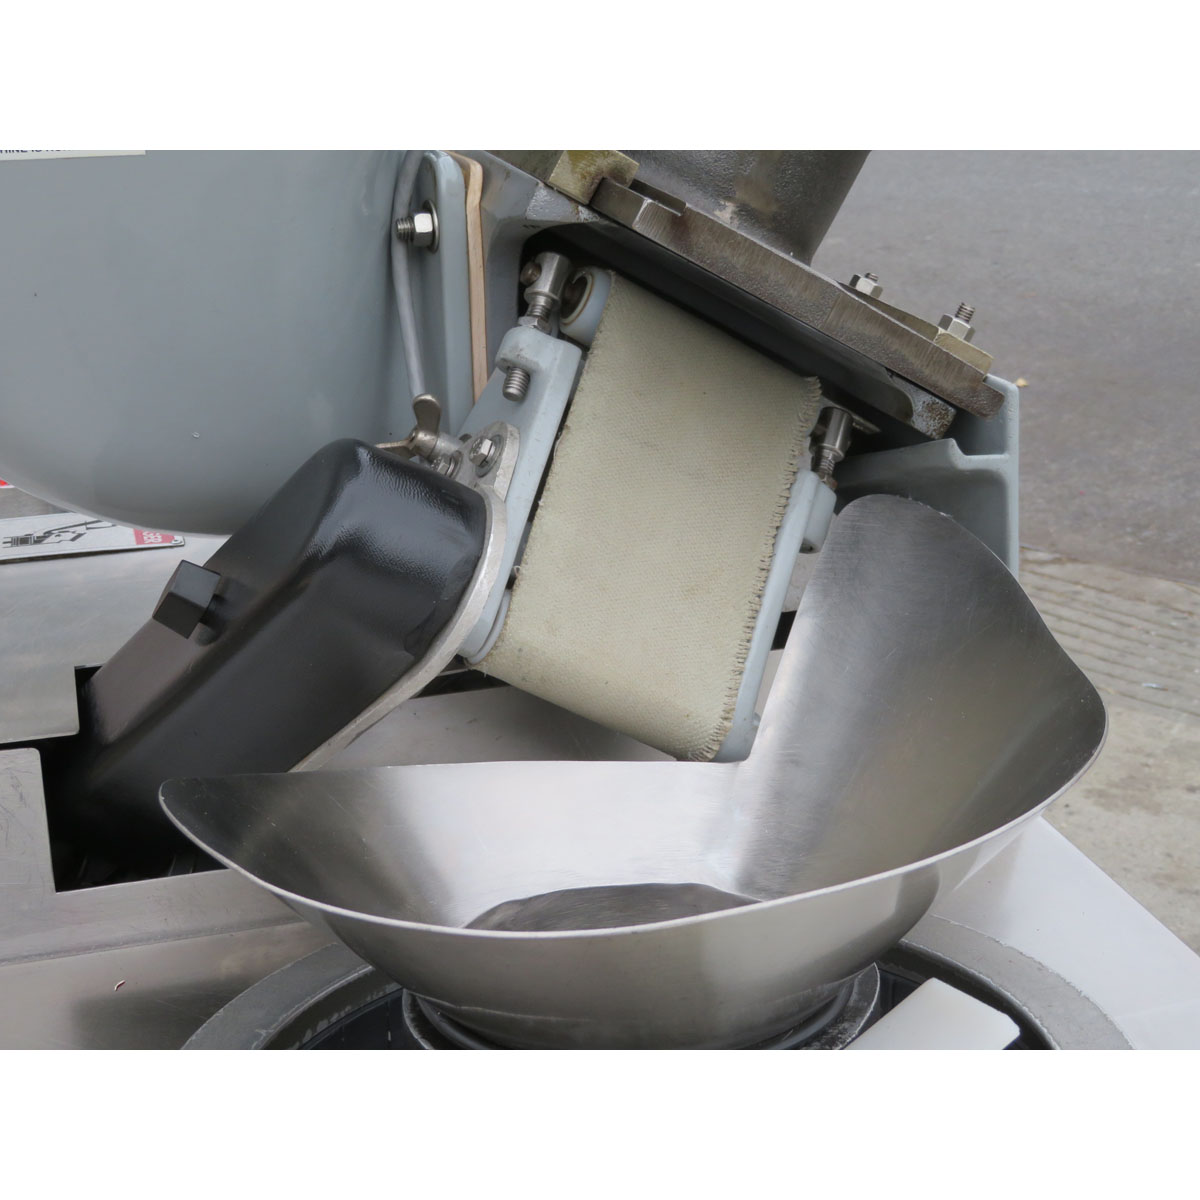 AM Manufacturing S300 Scale-O-Matic Dough Divider and Rounder, Used Great Condition image 6